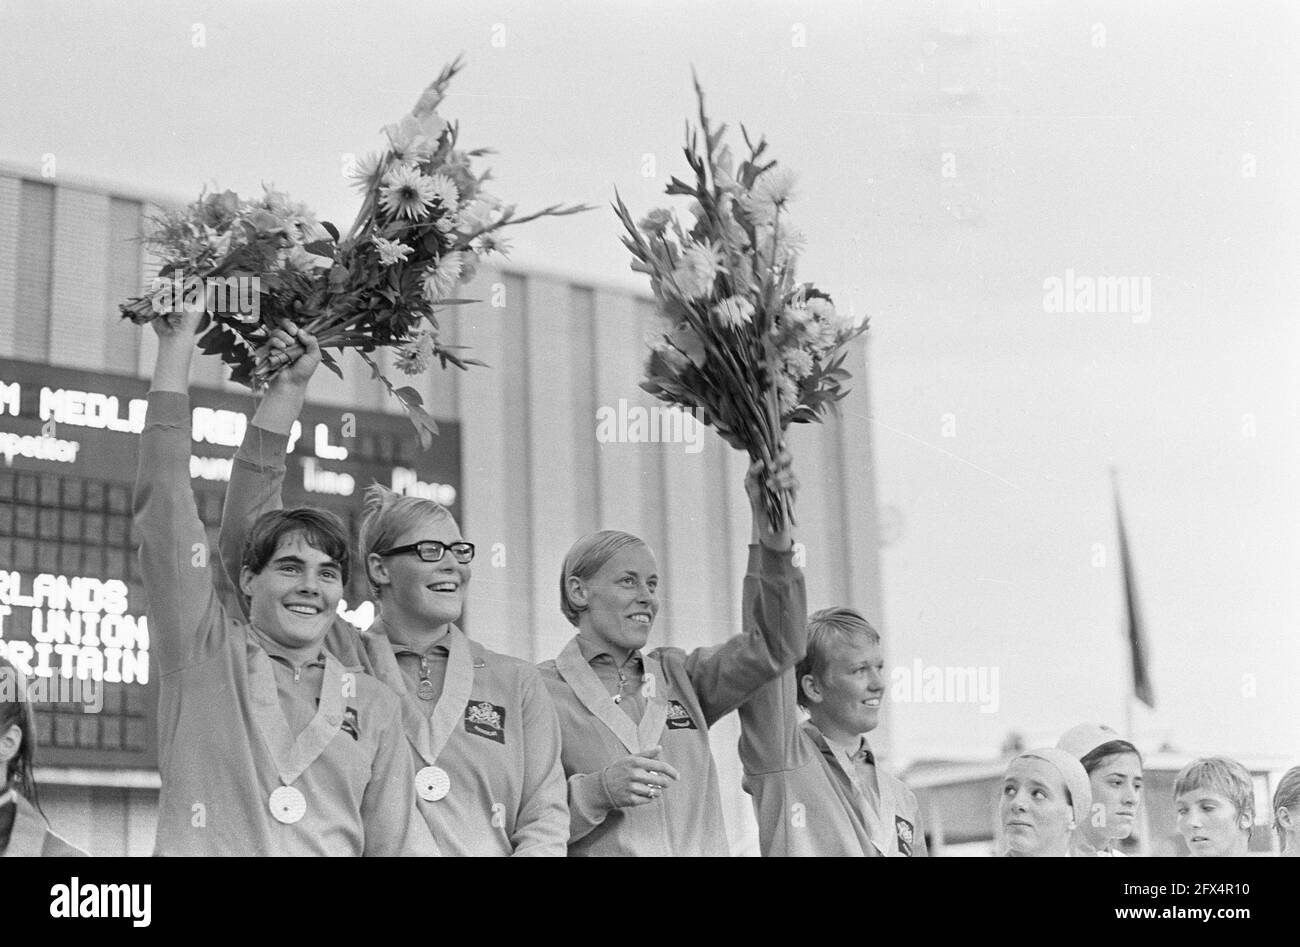 European Swimming Championships, 4 x 100 meter medley on scaffold Toos, Ada, Gretta and Cobi, 6 waving to audience, August 25, 1966, swimming championships, The Netherlands, 20th century press agency photo, news to remember, documentary, historic photography 1945-1990, visual stories, human history of the Twentieth Century, capturing moments in time Stock Photo